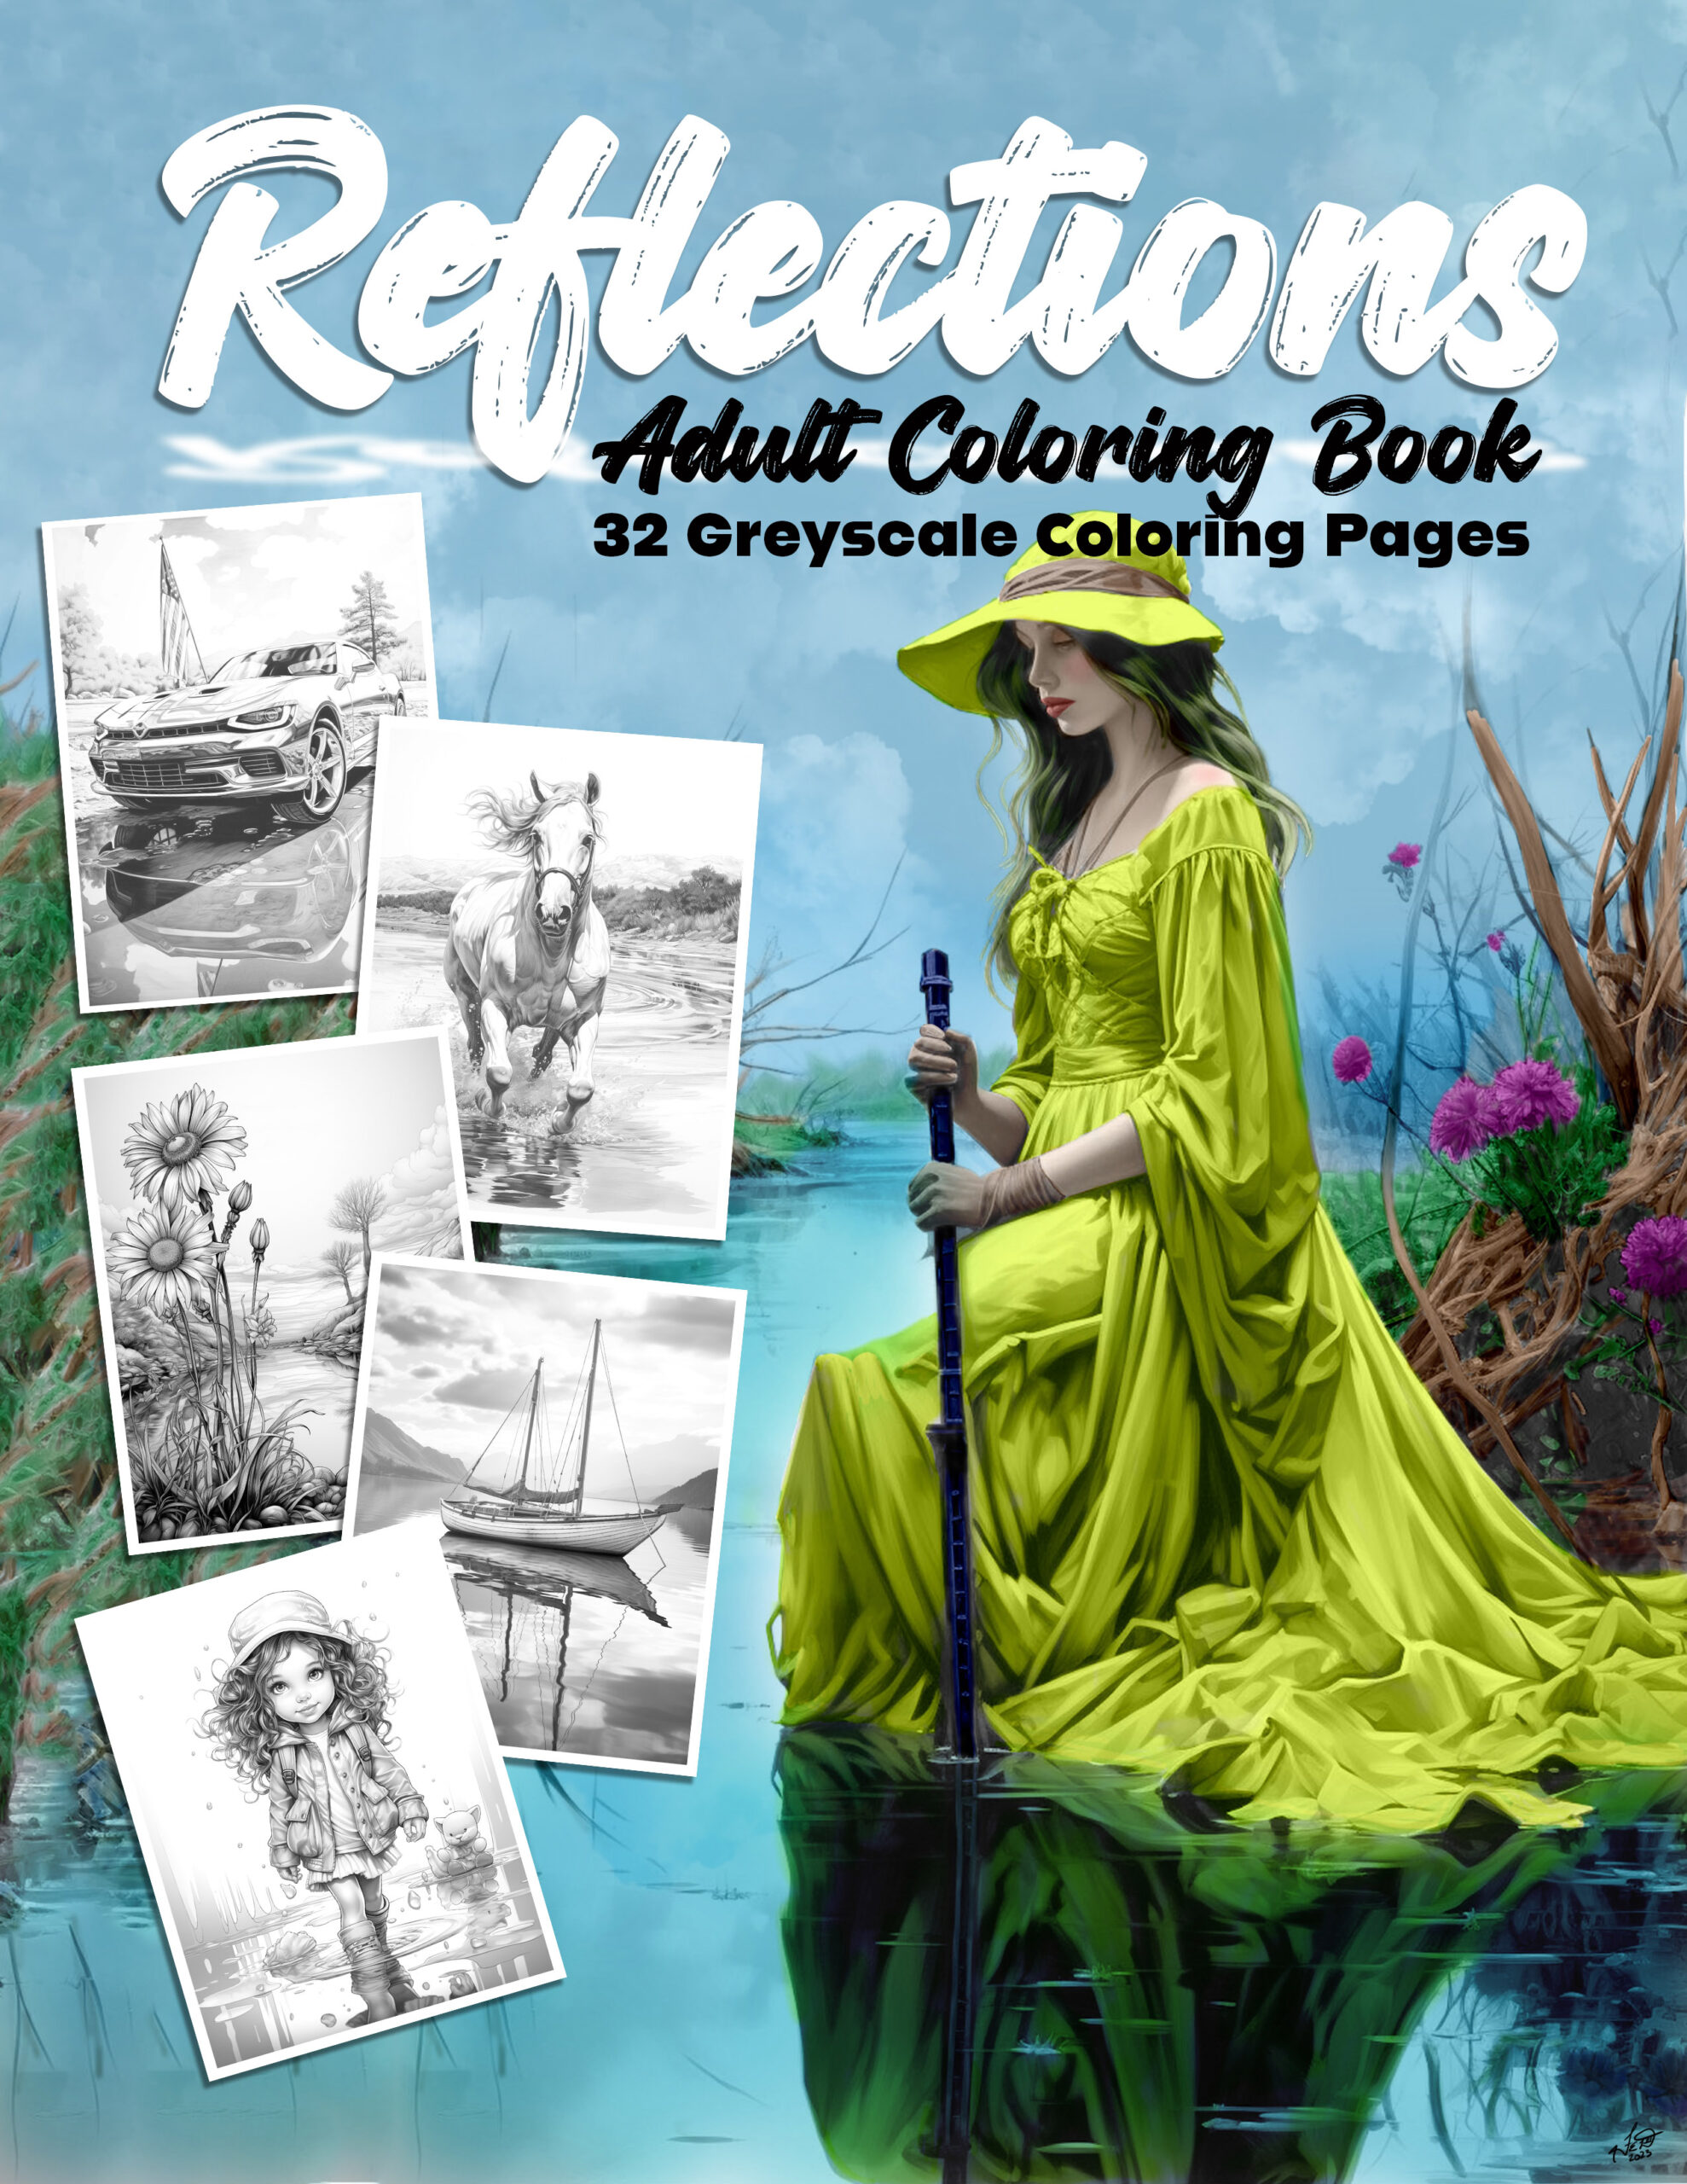 Reflections adult coloring book